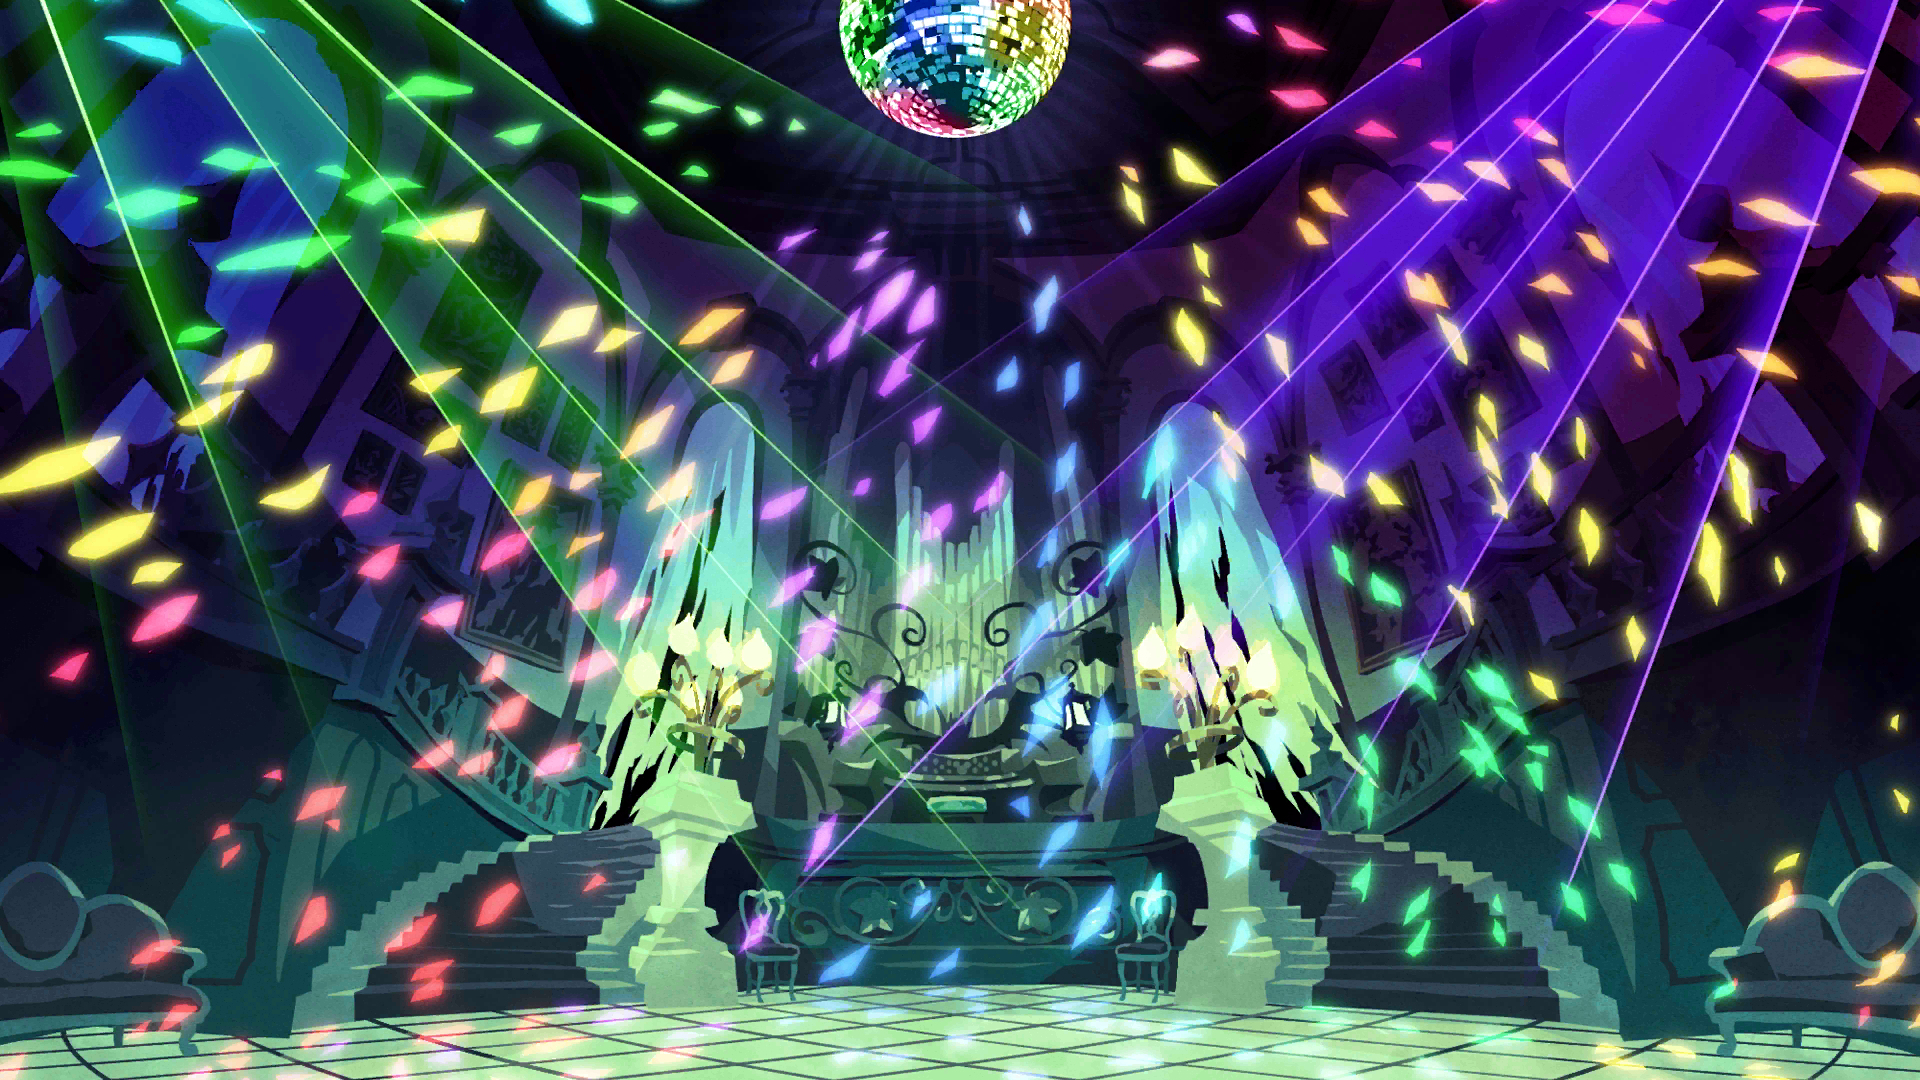 Other Dimension Sparkling Chamber (Disco)